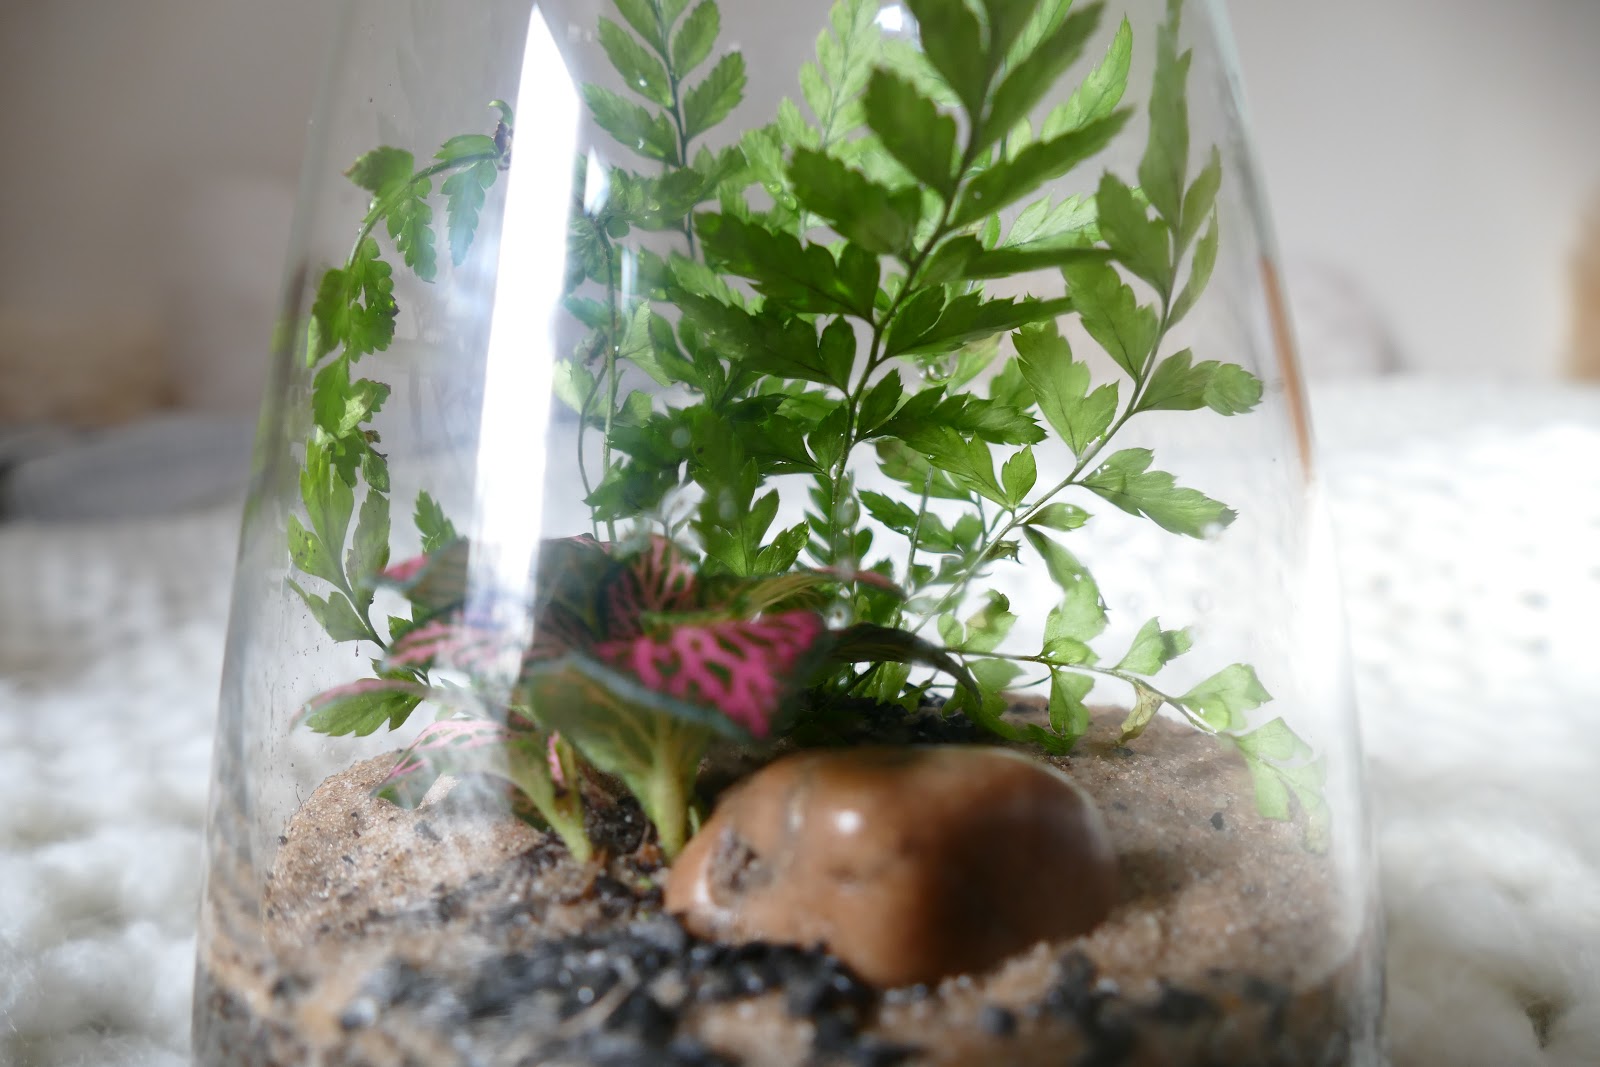 How To Decorate With Terrariums- ConcreteLabCo Review 